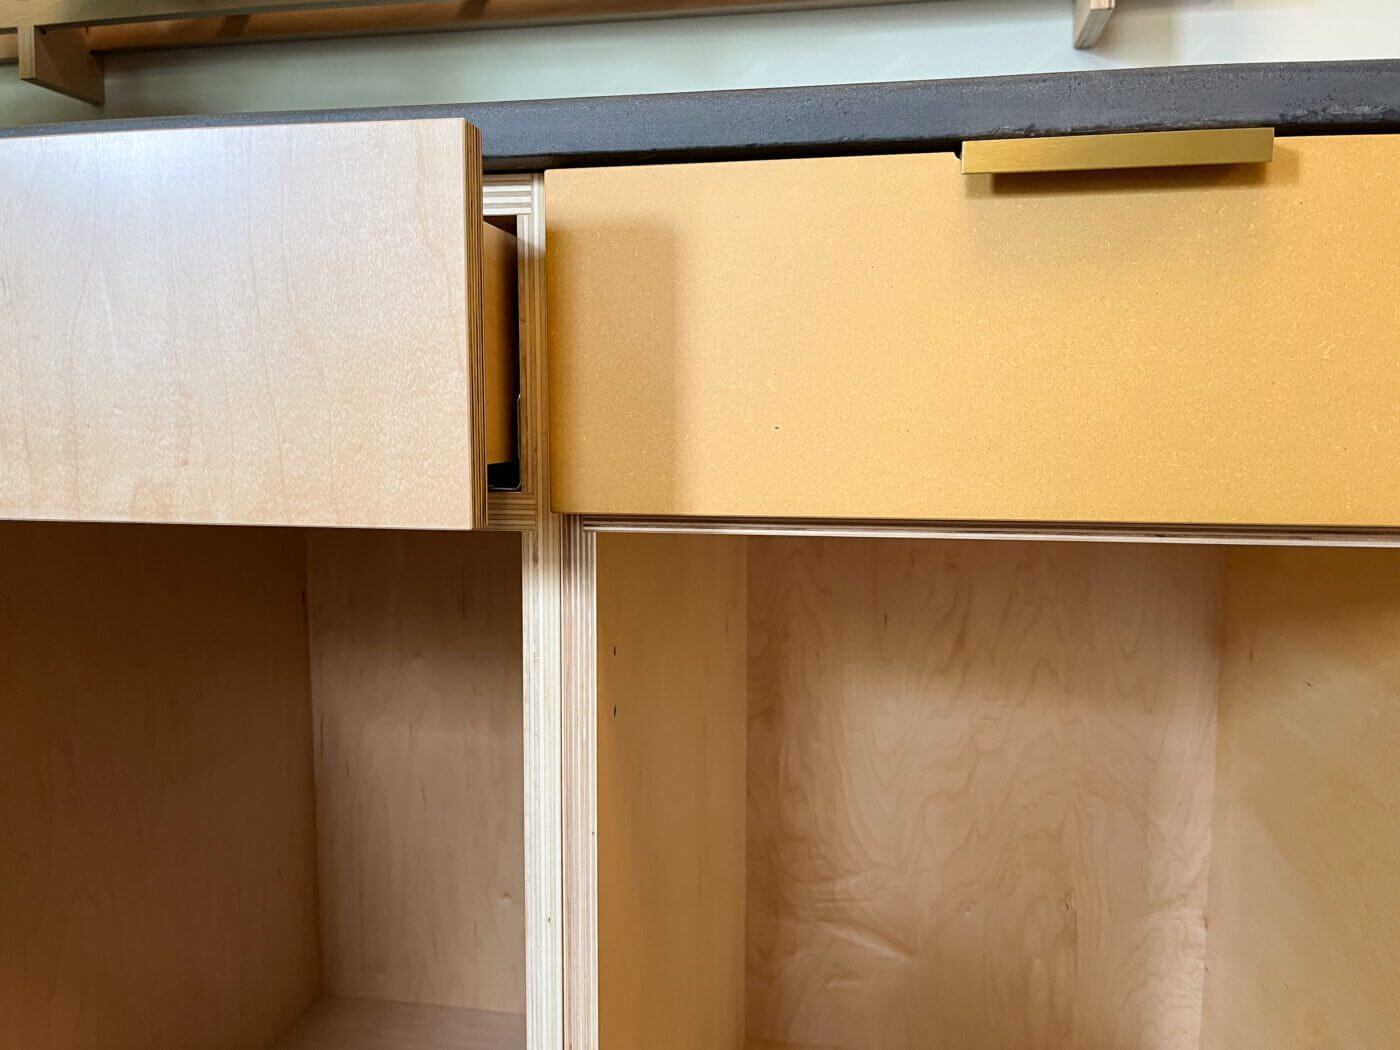 Cabinets are made without edge banding, and designed to show off the beautiful edges of our high-quality plywood cases and fronts. The cabinet on the left shows a clear-coated maple veneer finish, while the cabinet on the right is our Turmeric custom color finish over Medex.